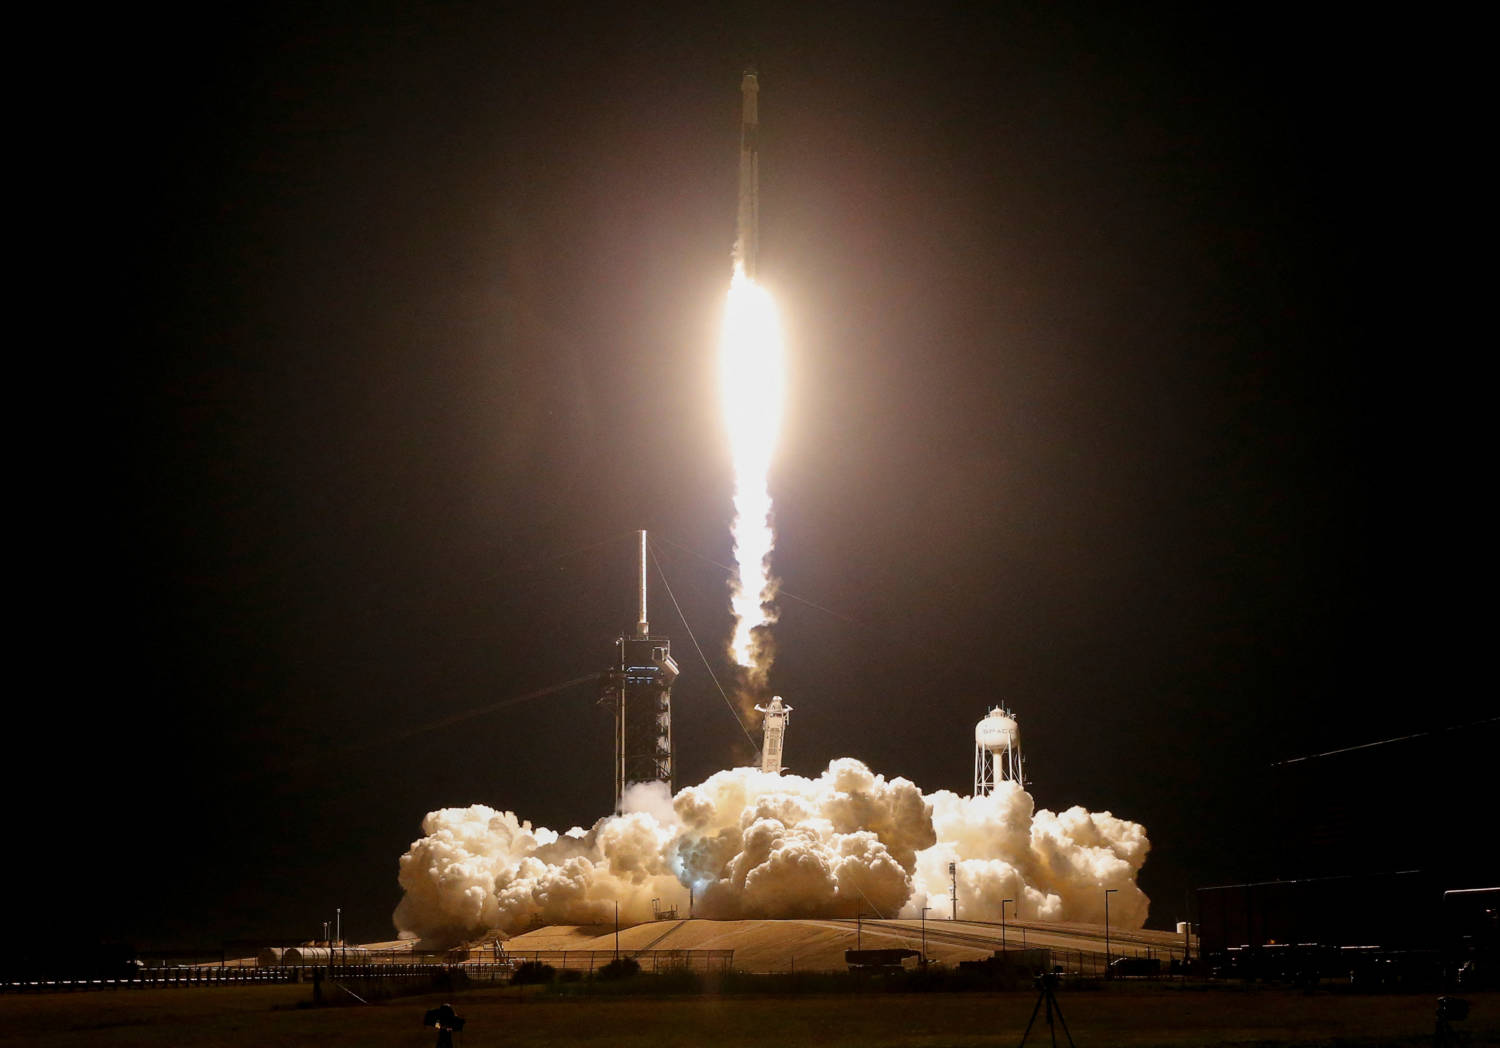 A Spacex Falcon 9 Rocket Lifts Off Carrying Nasa's Spacex Crew 8 Astronauts